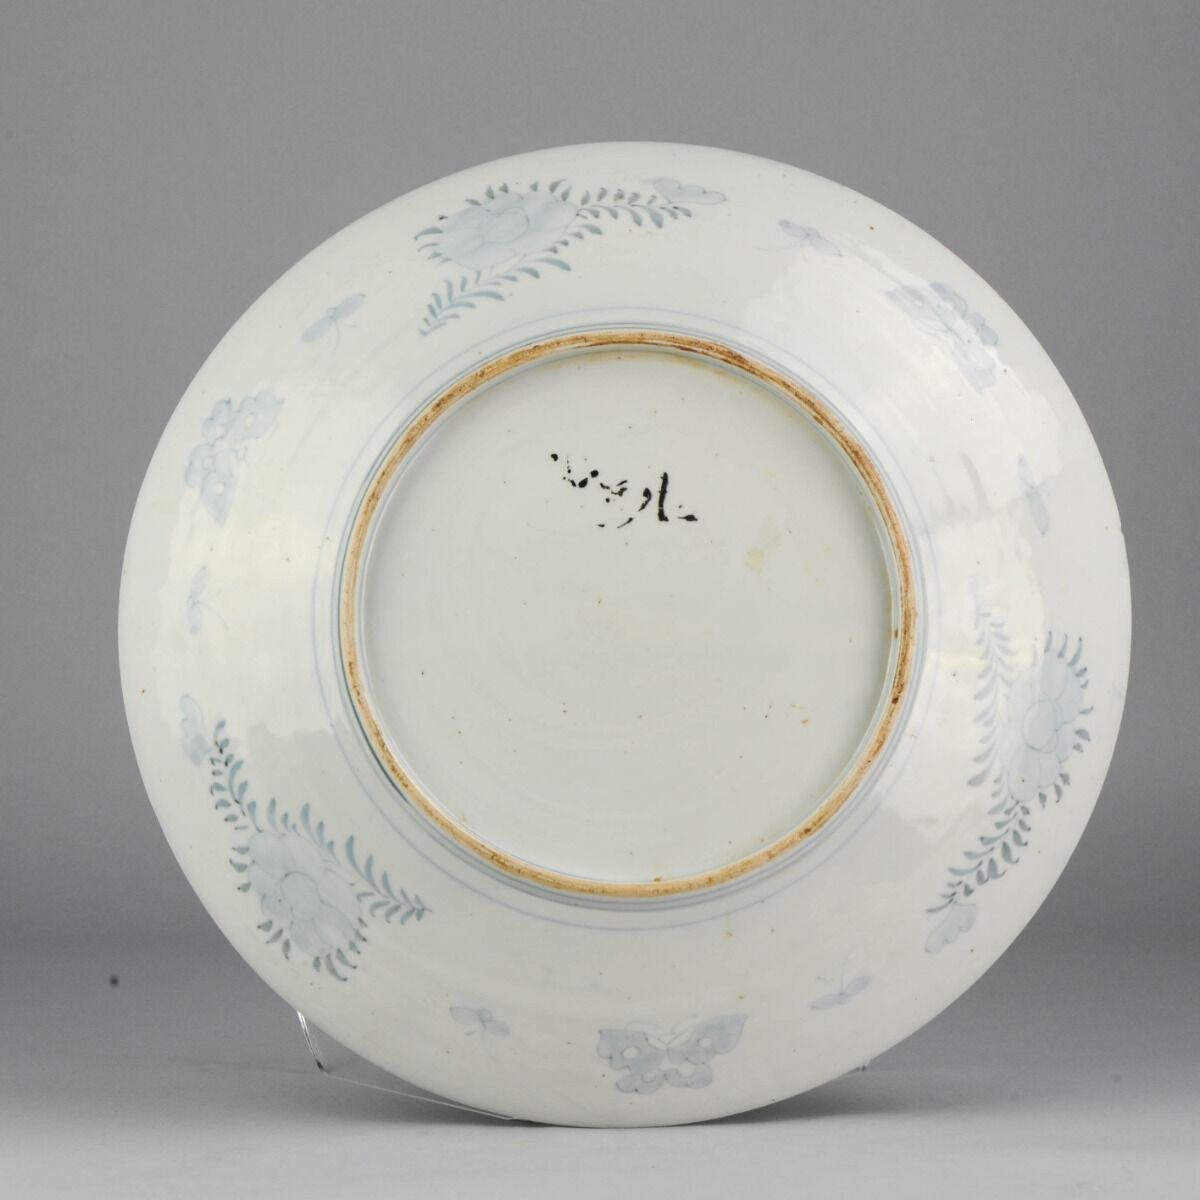 Large Antique Arita Japanese Porcelain Charger Edo Meiji Period Plate, 19th C In Good Condition For Sale In Amsterdam, Noord Holland